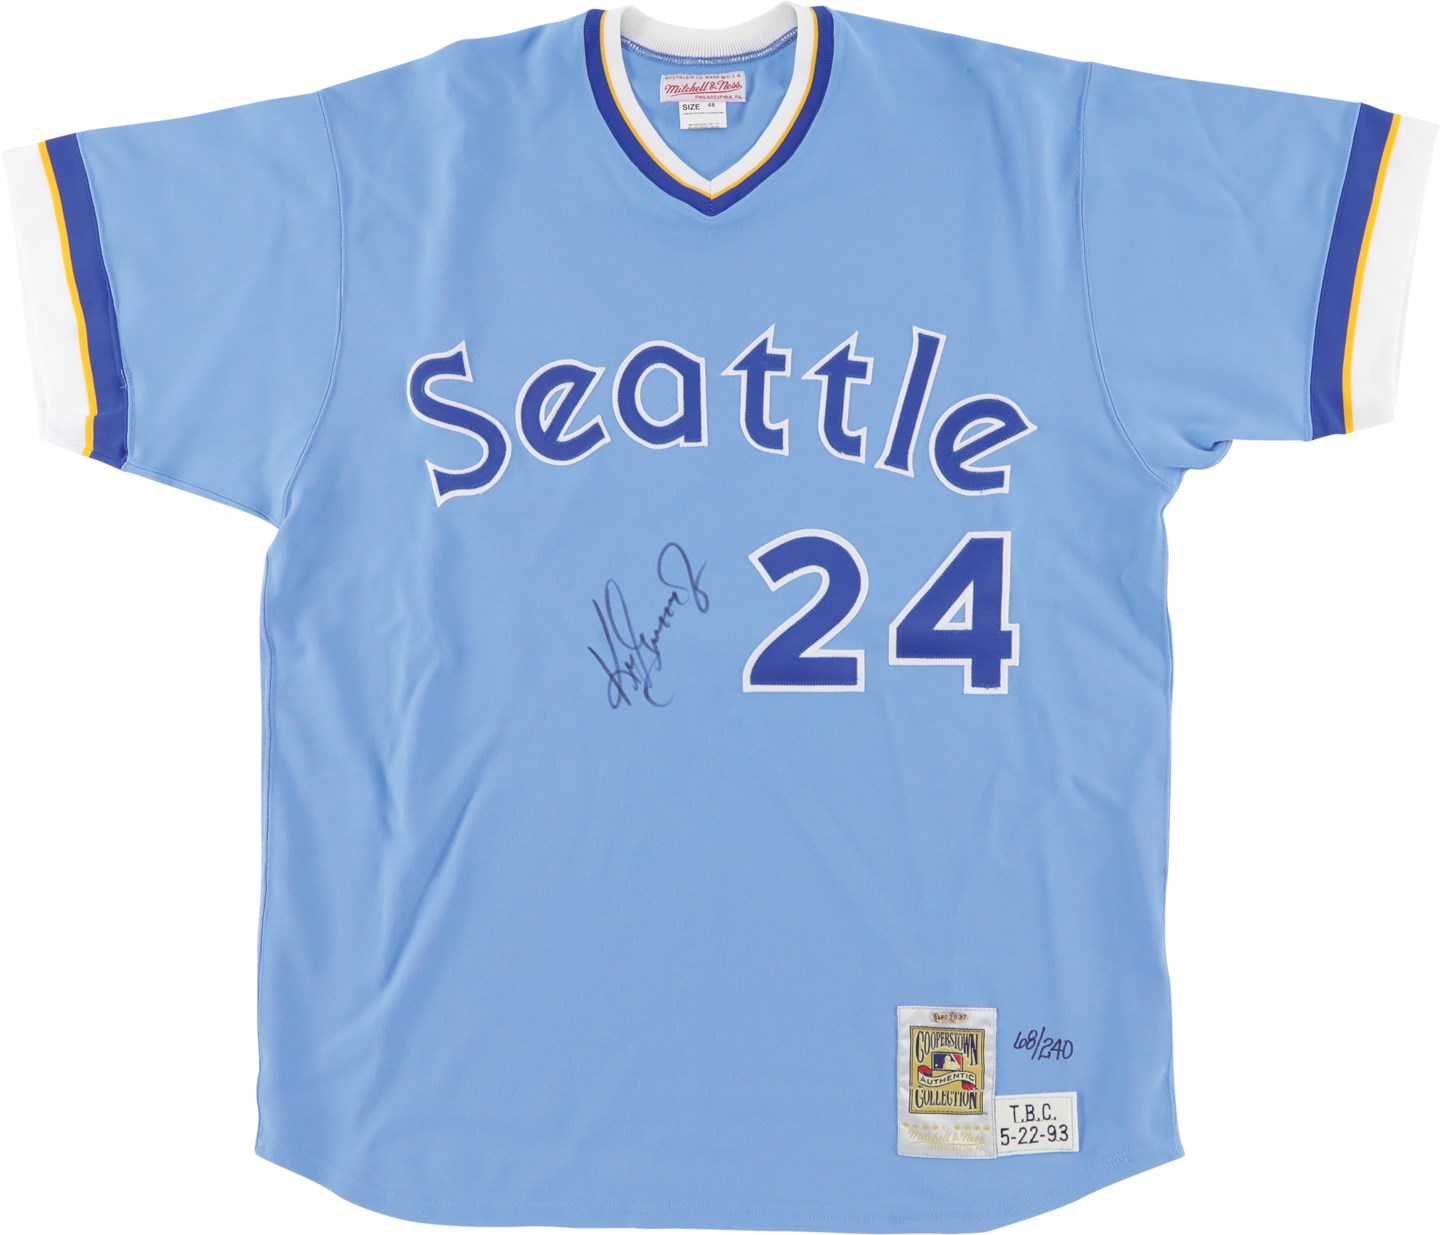 - Ken Griffey Jr, Seattle Mariners "Turn Back the Clock" Limited Edition Signed Jersey #68/240 (UDA)